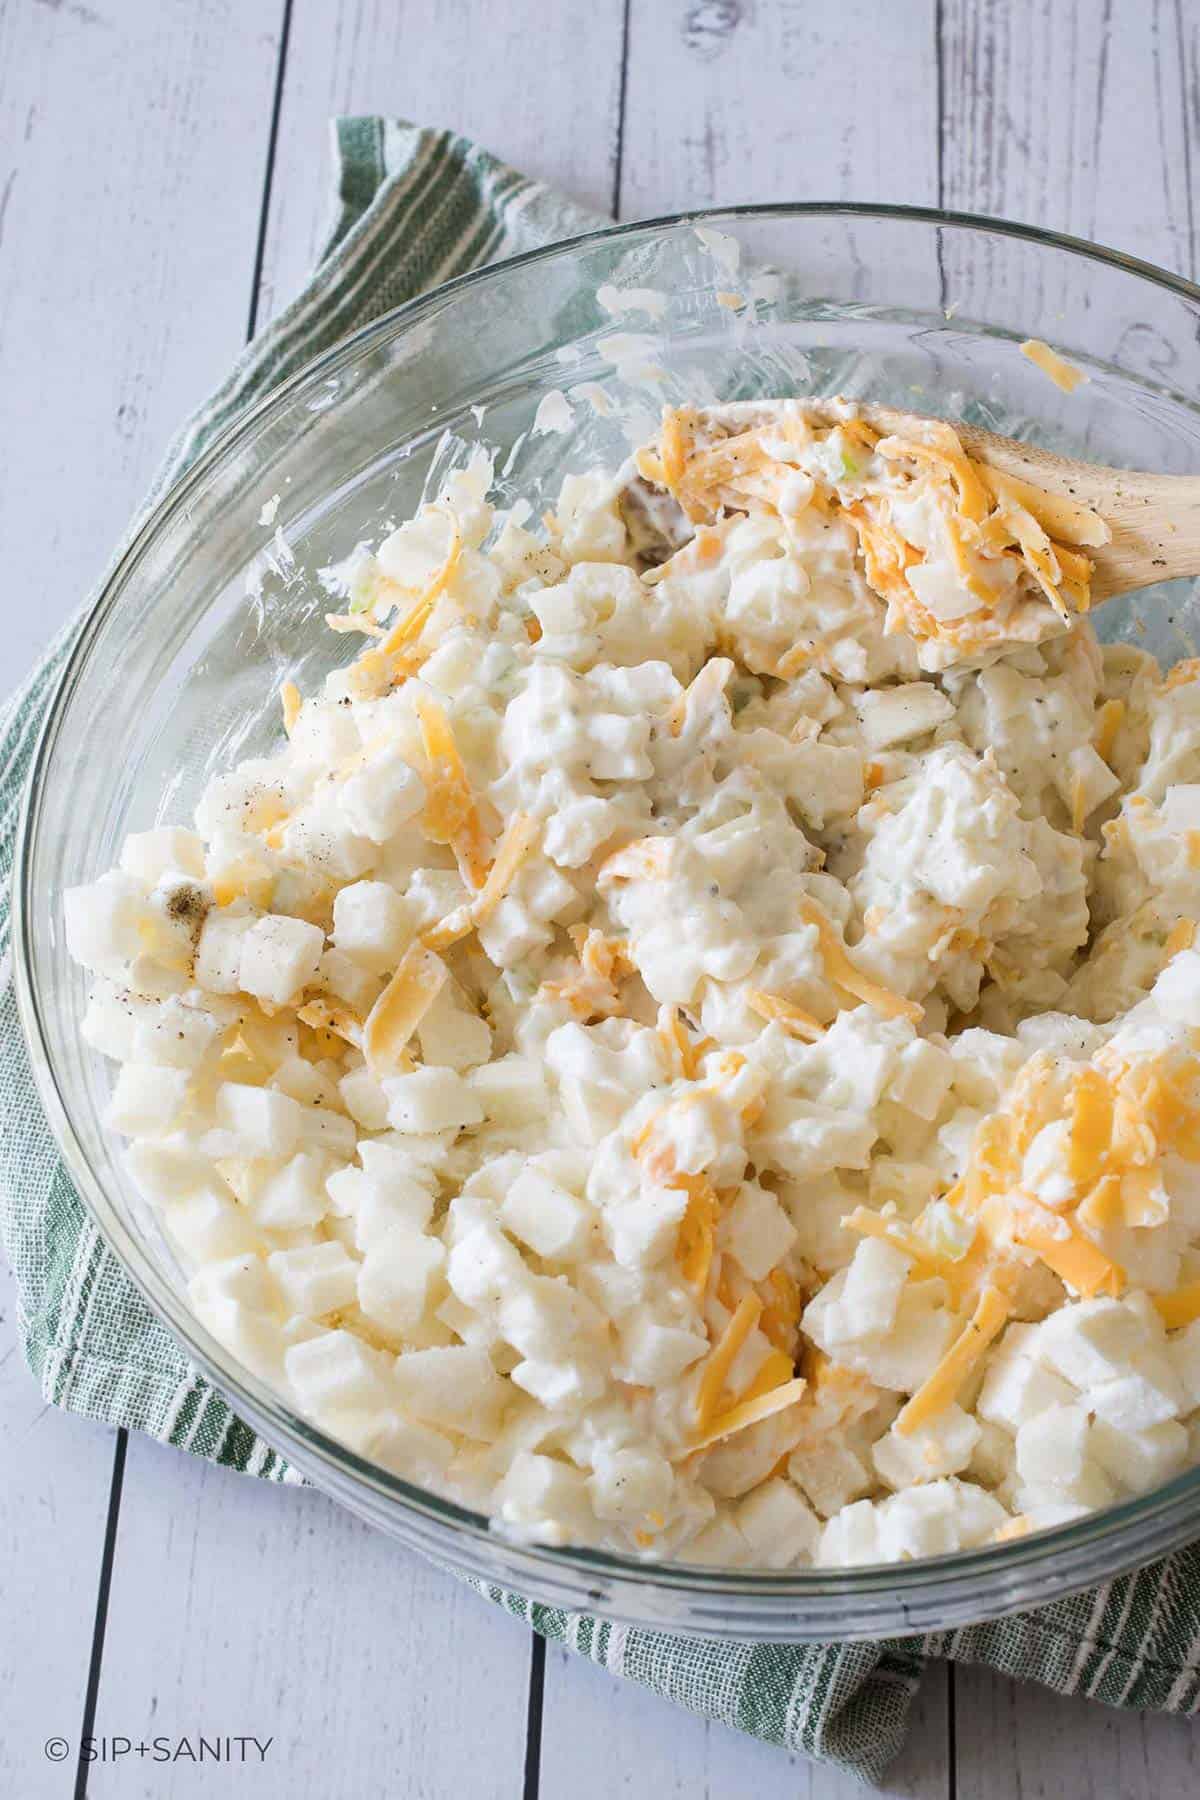 Diced potatoes, shredded cheddar and creamy sauce being mixed together in a glass bowl.